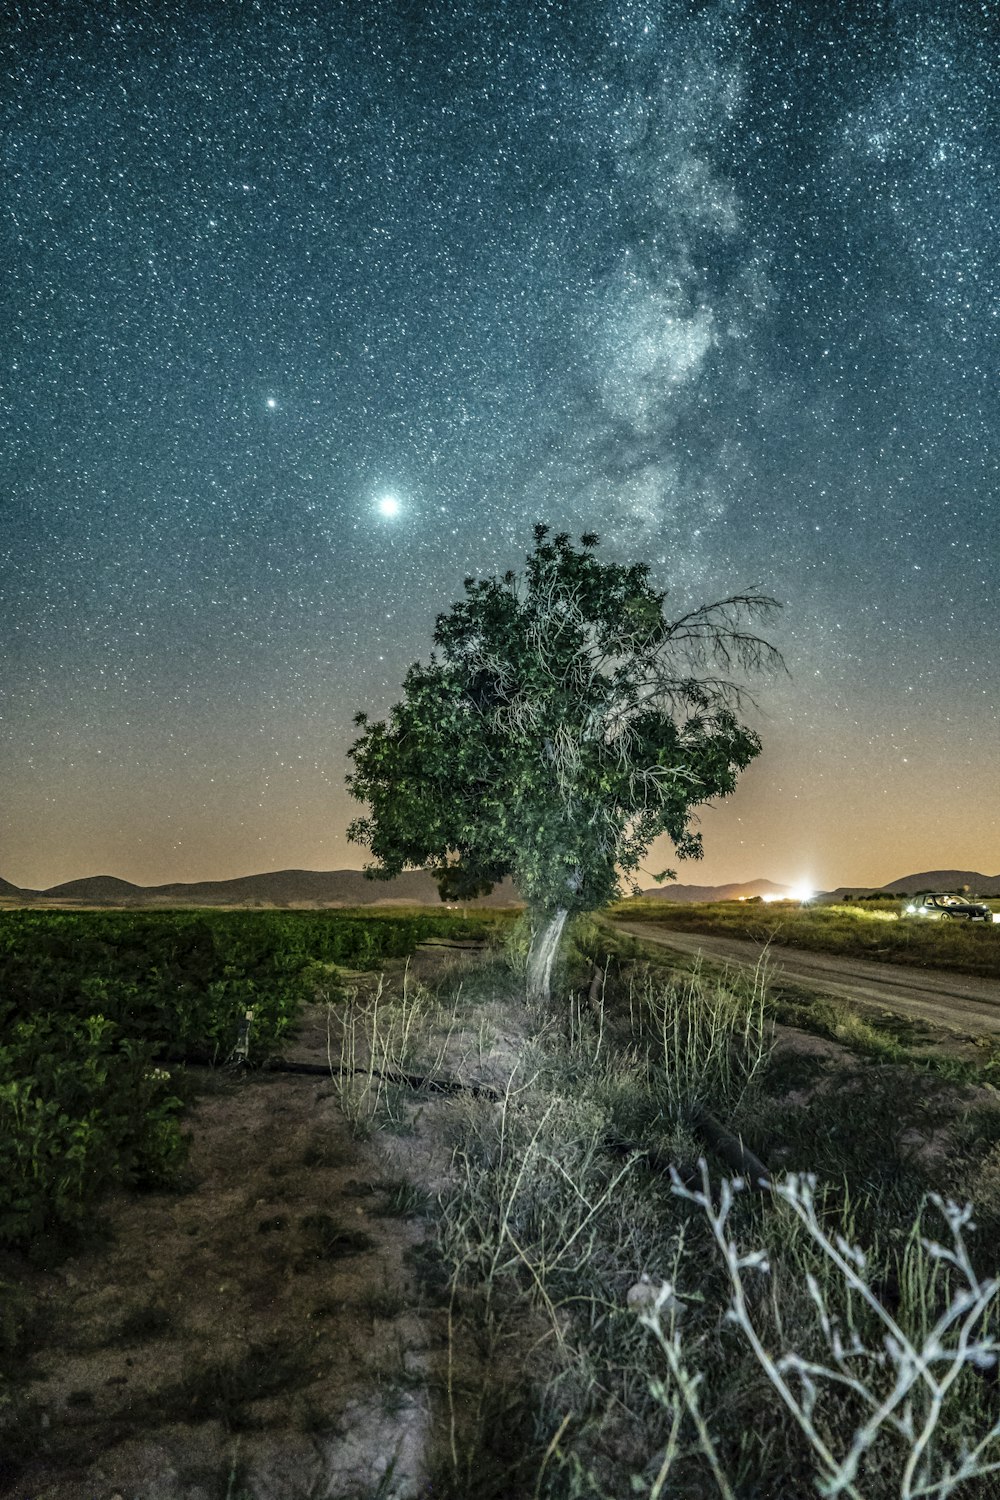 a lone tree on a dirt road under a night sky filled with stars